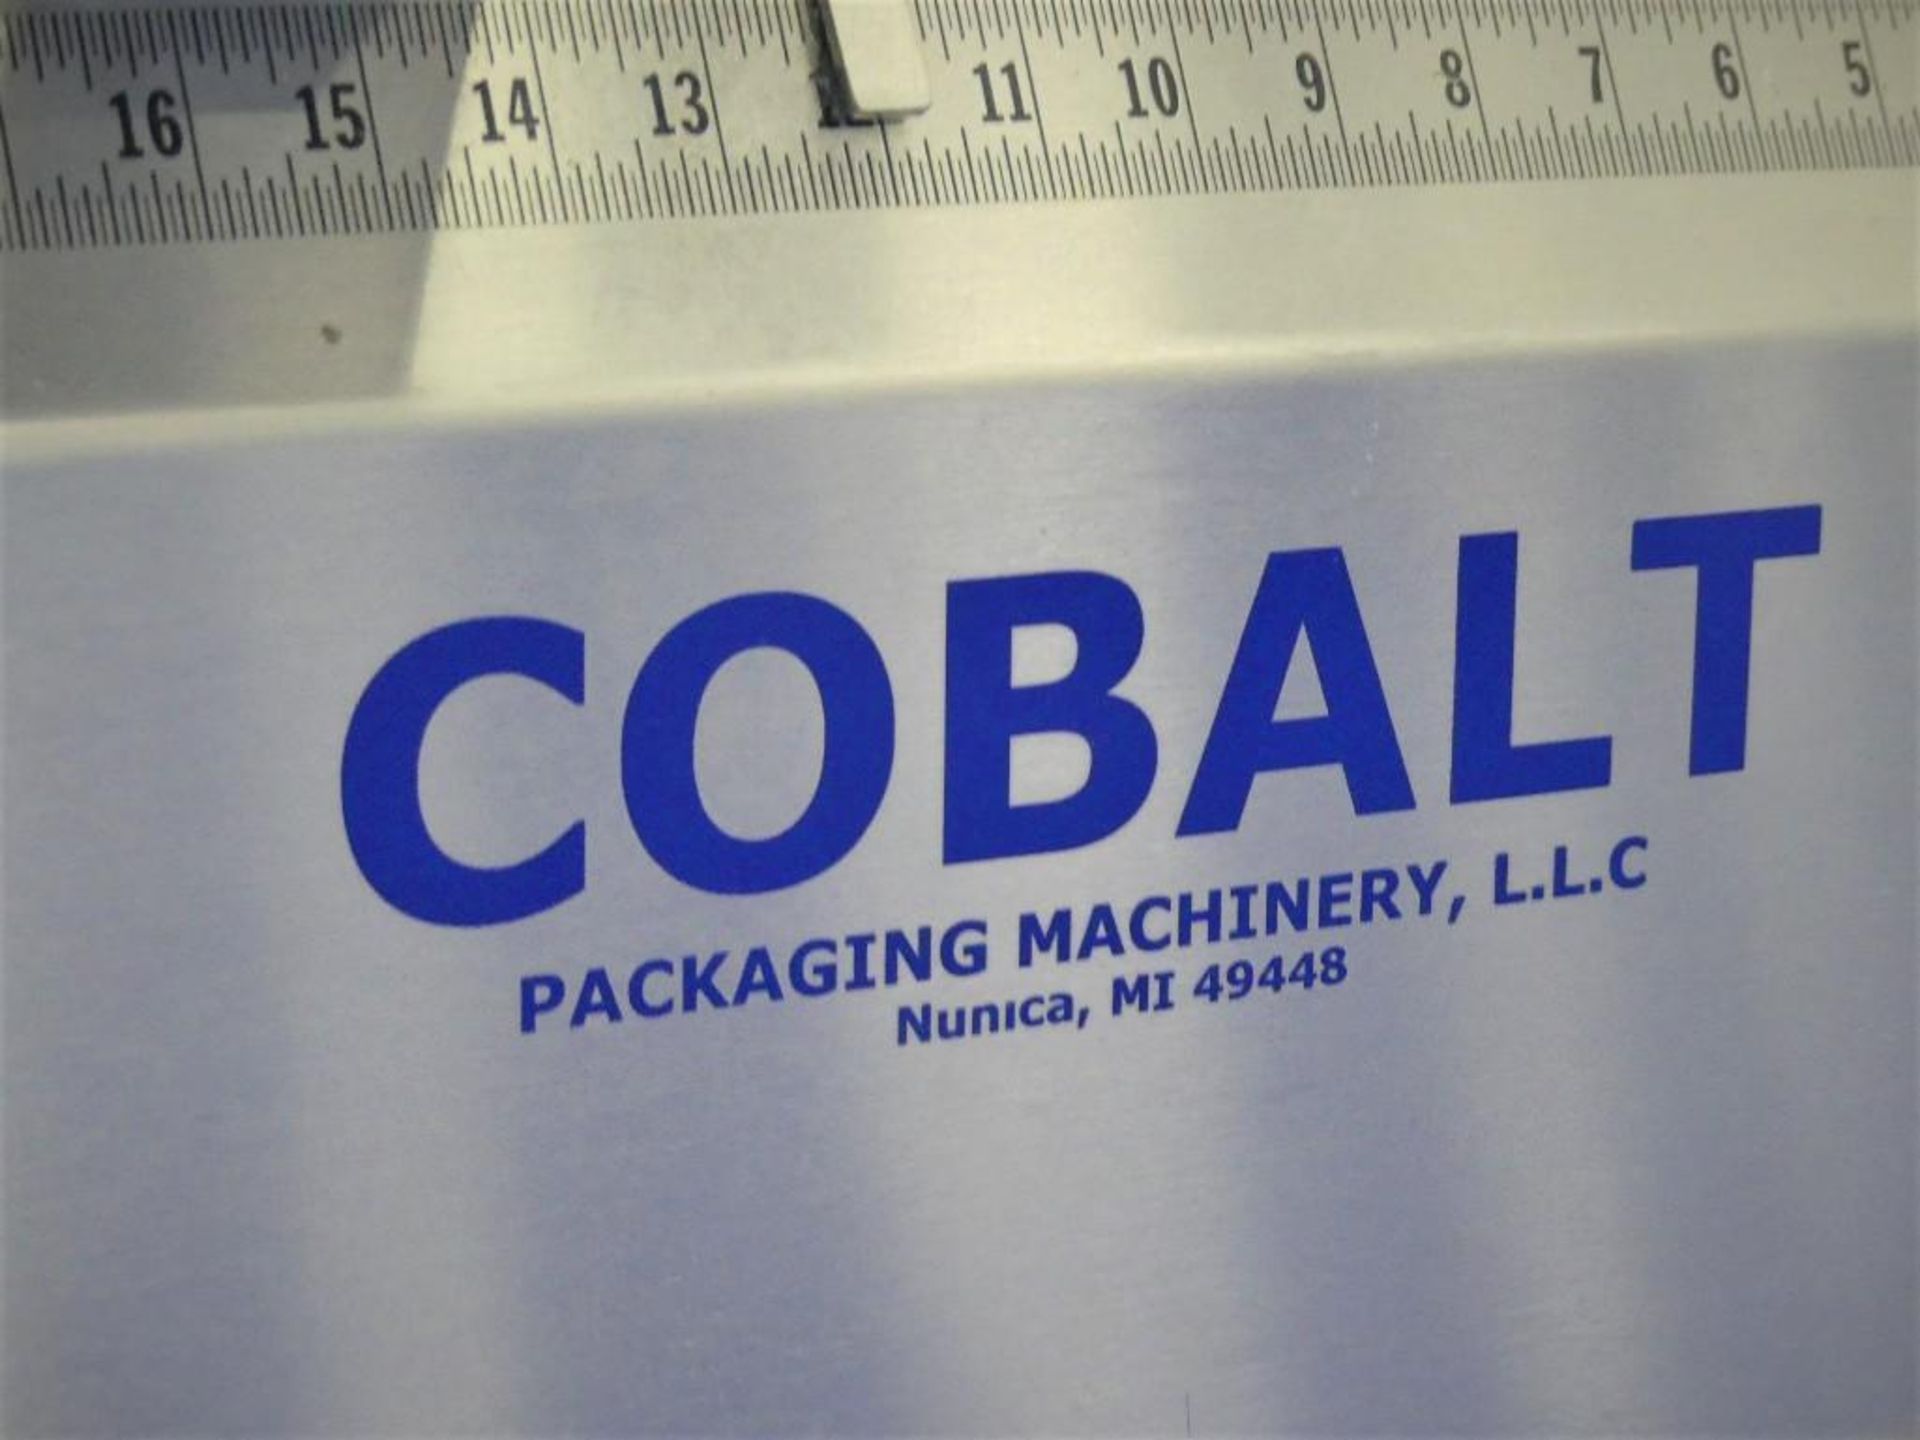 Cobalt 100 Series Semi-Automatic Case Former - Image 9 of 10